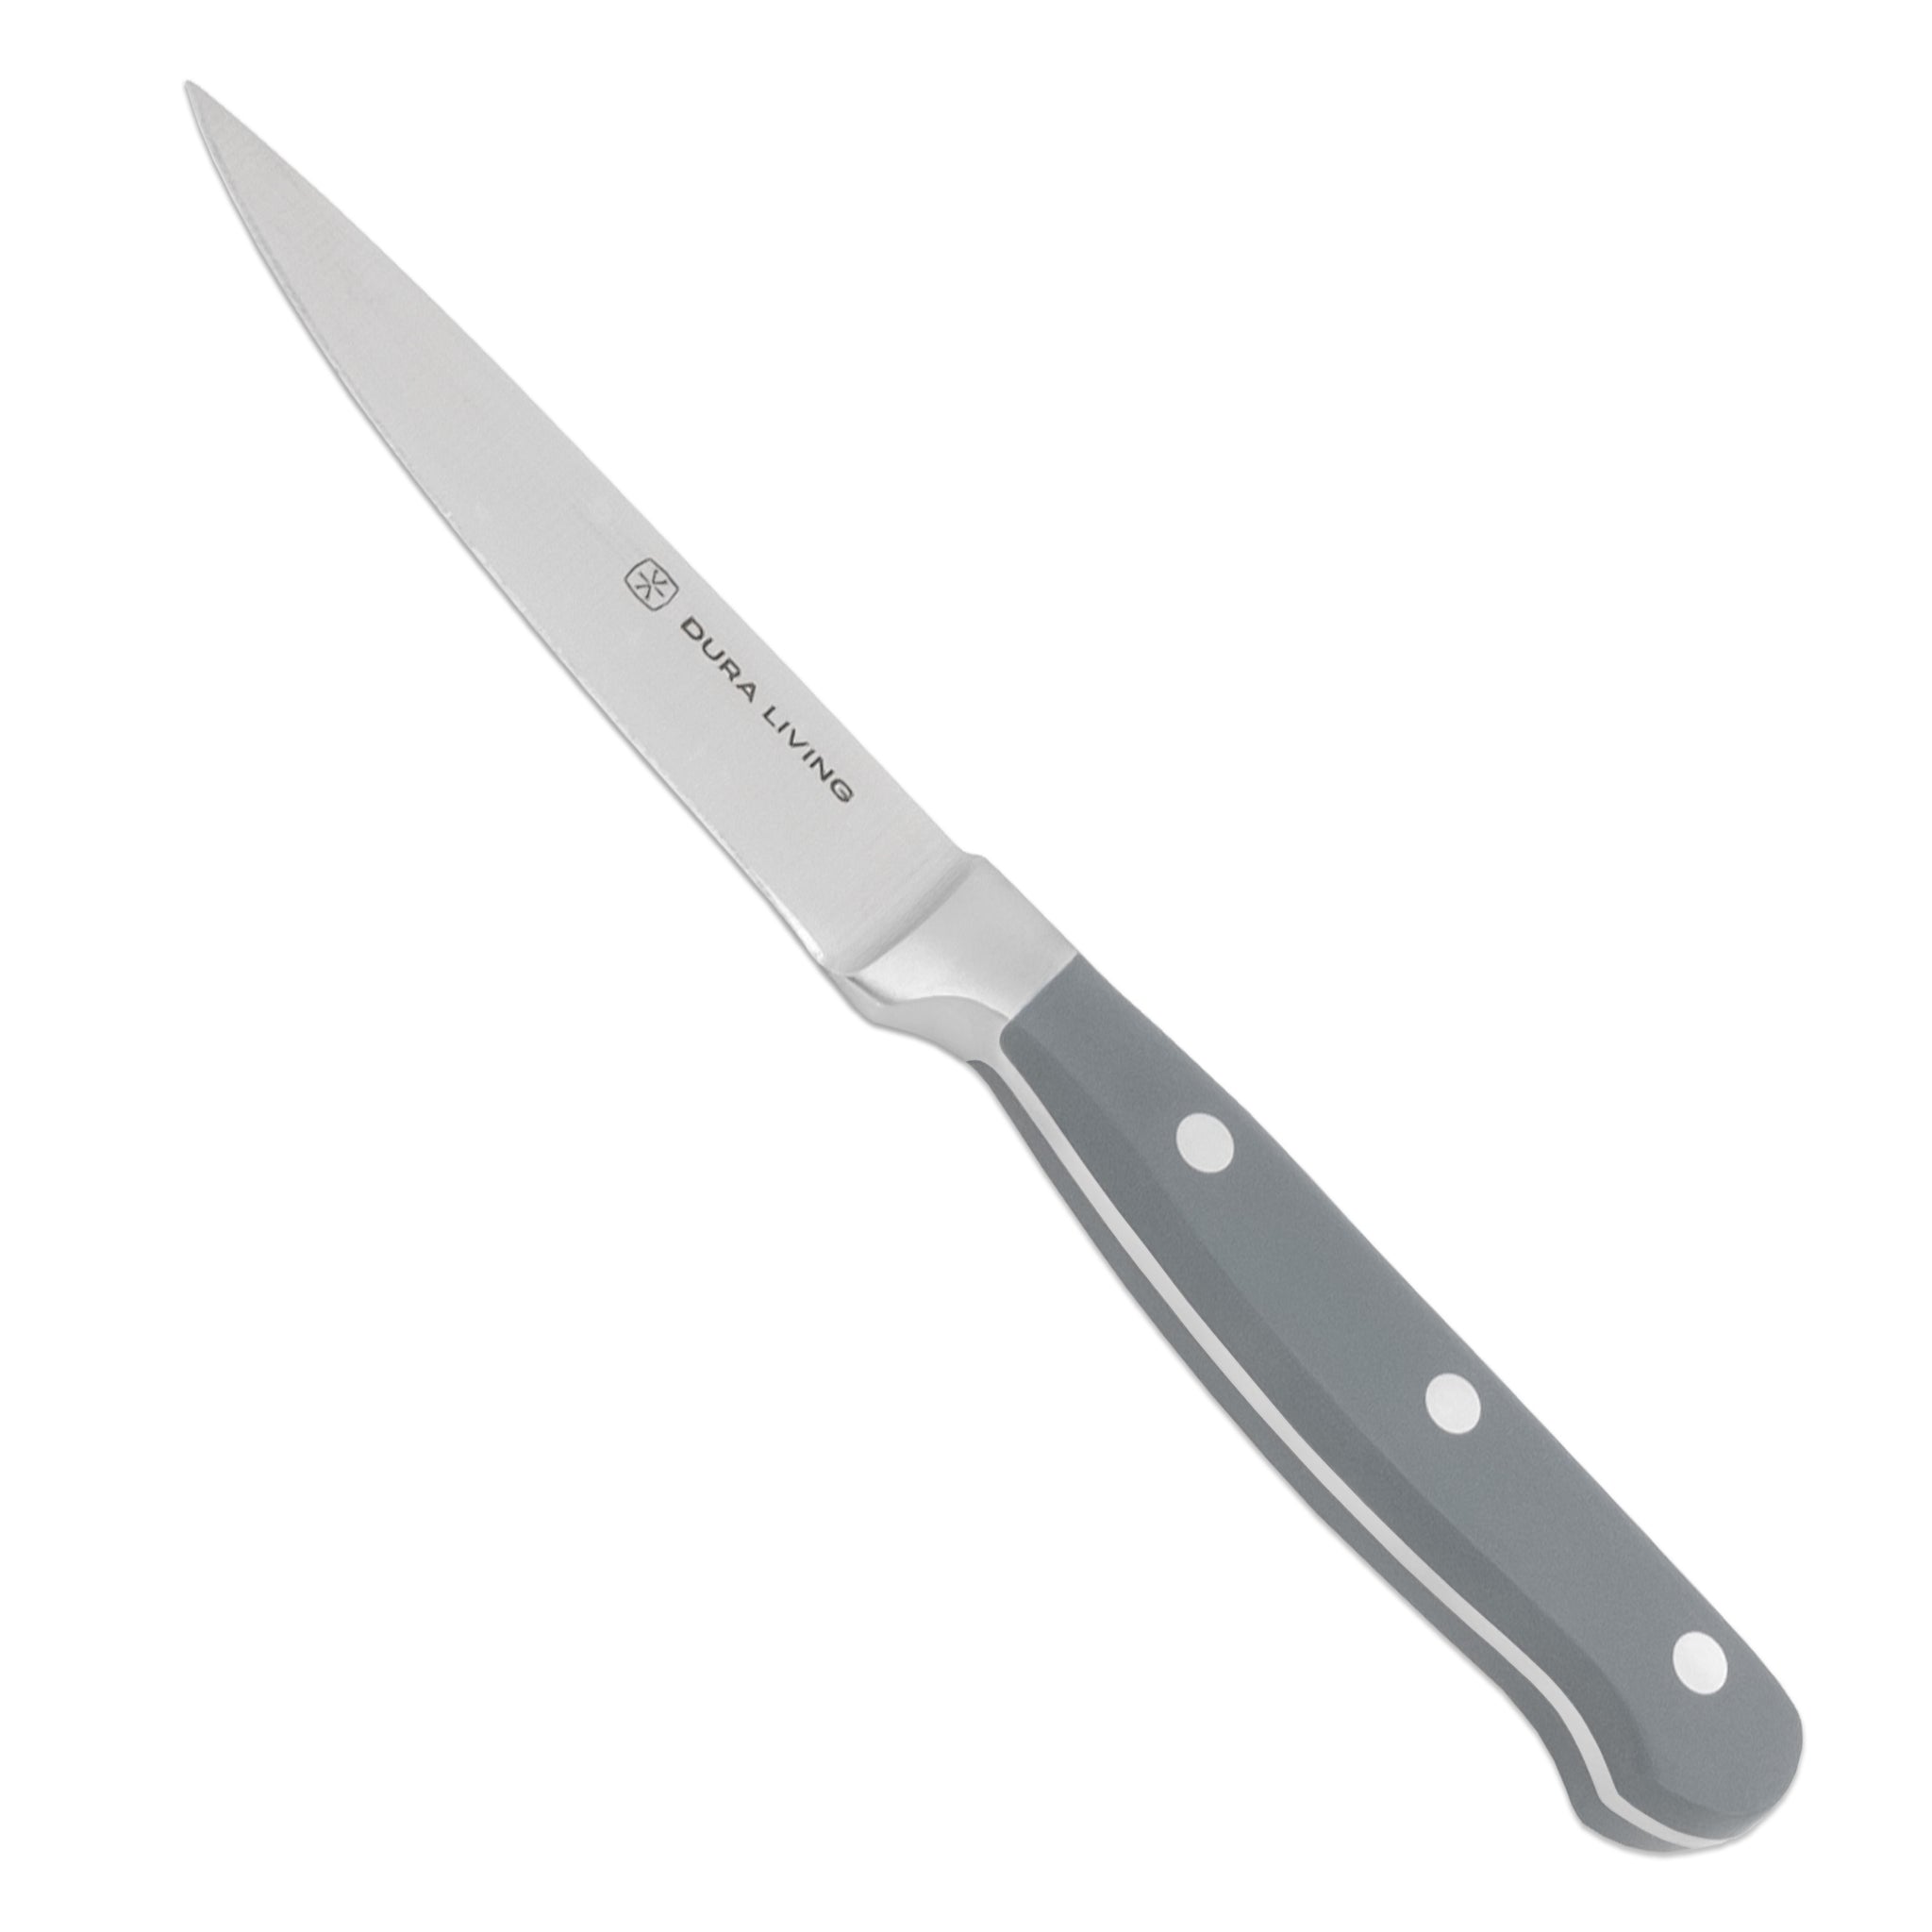 Superior 3.5 inch Paring Knife - Gray